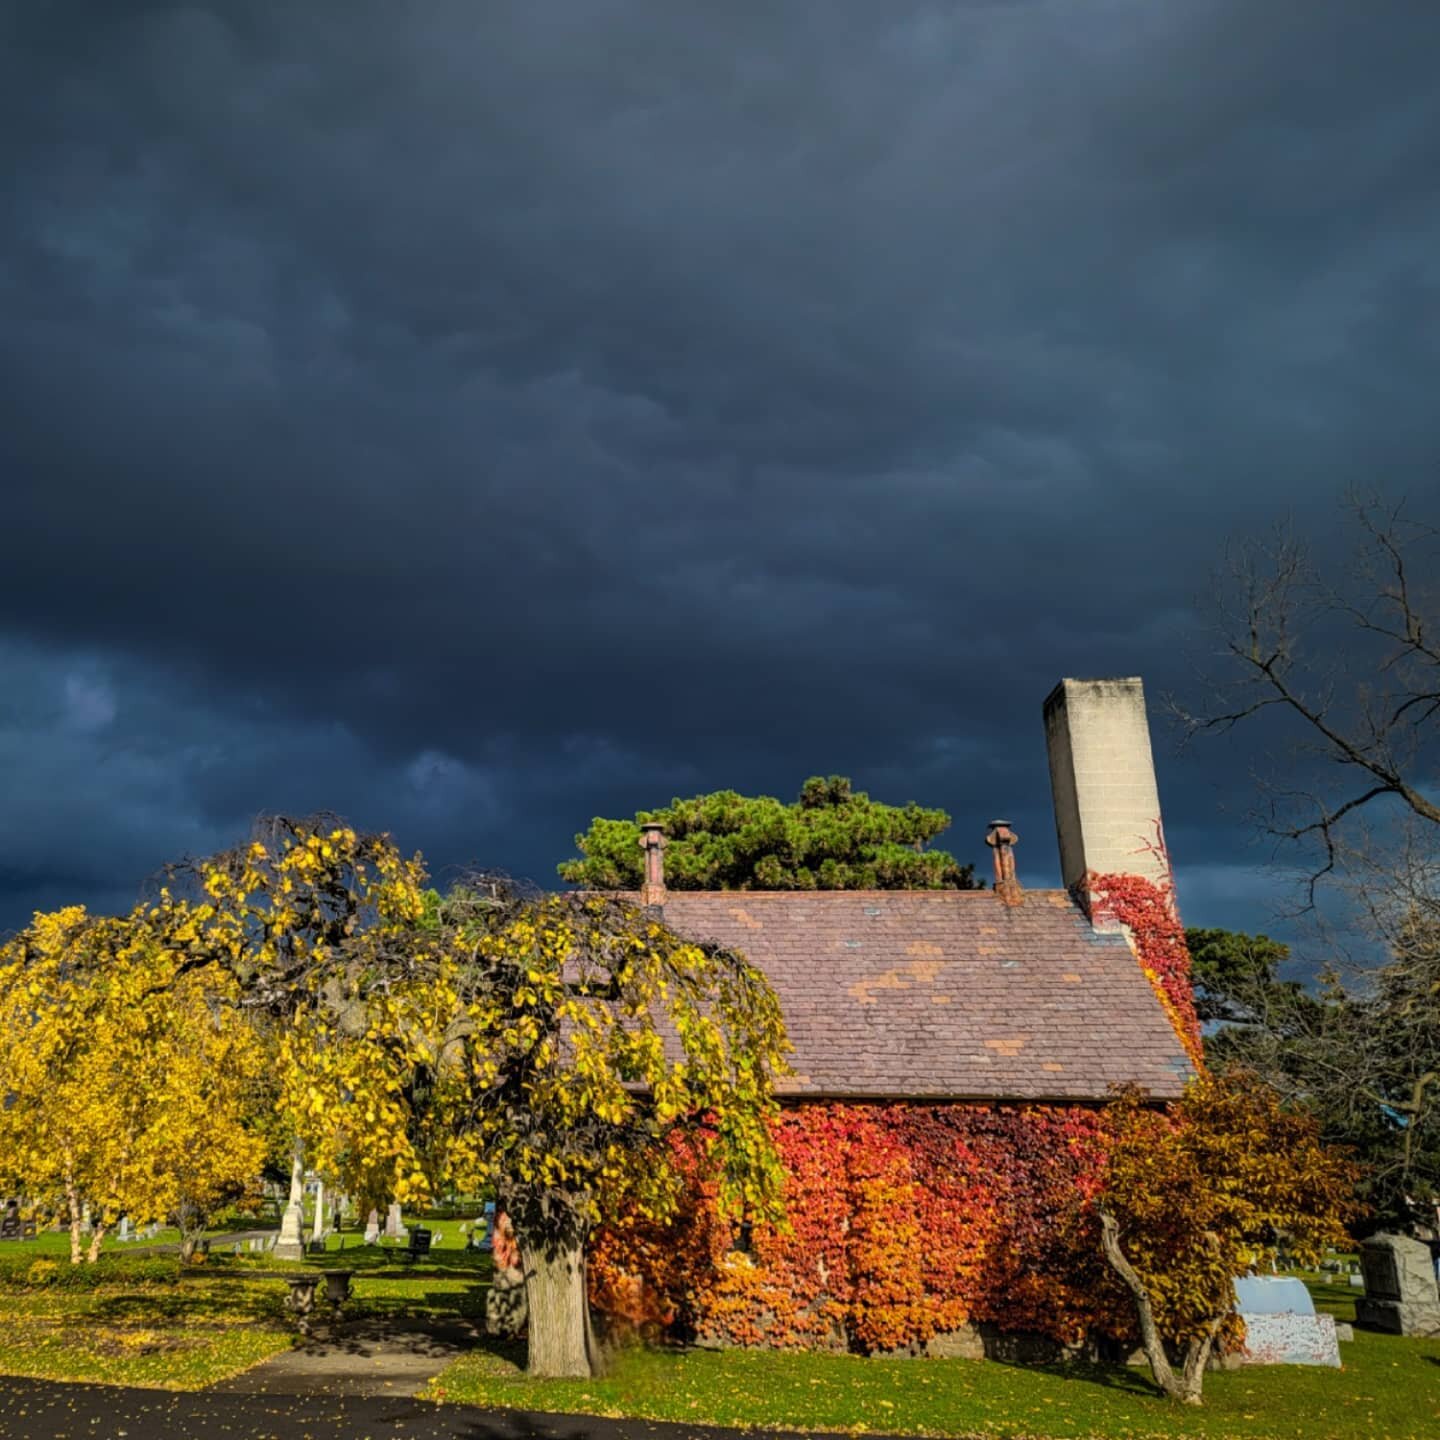 Crazy lighting and clouds. #oakwoodniagara #cemeterylovers #cemeteryphotography #livenf #discover_niagara